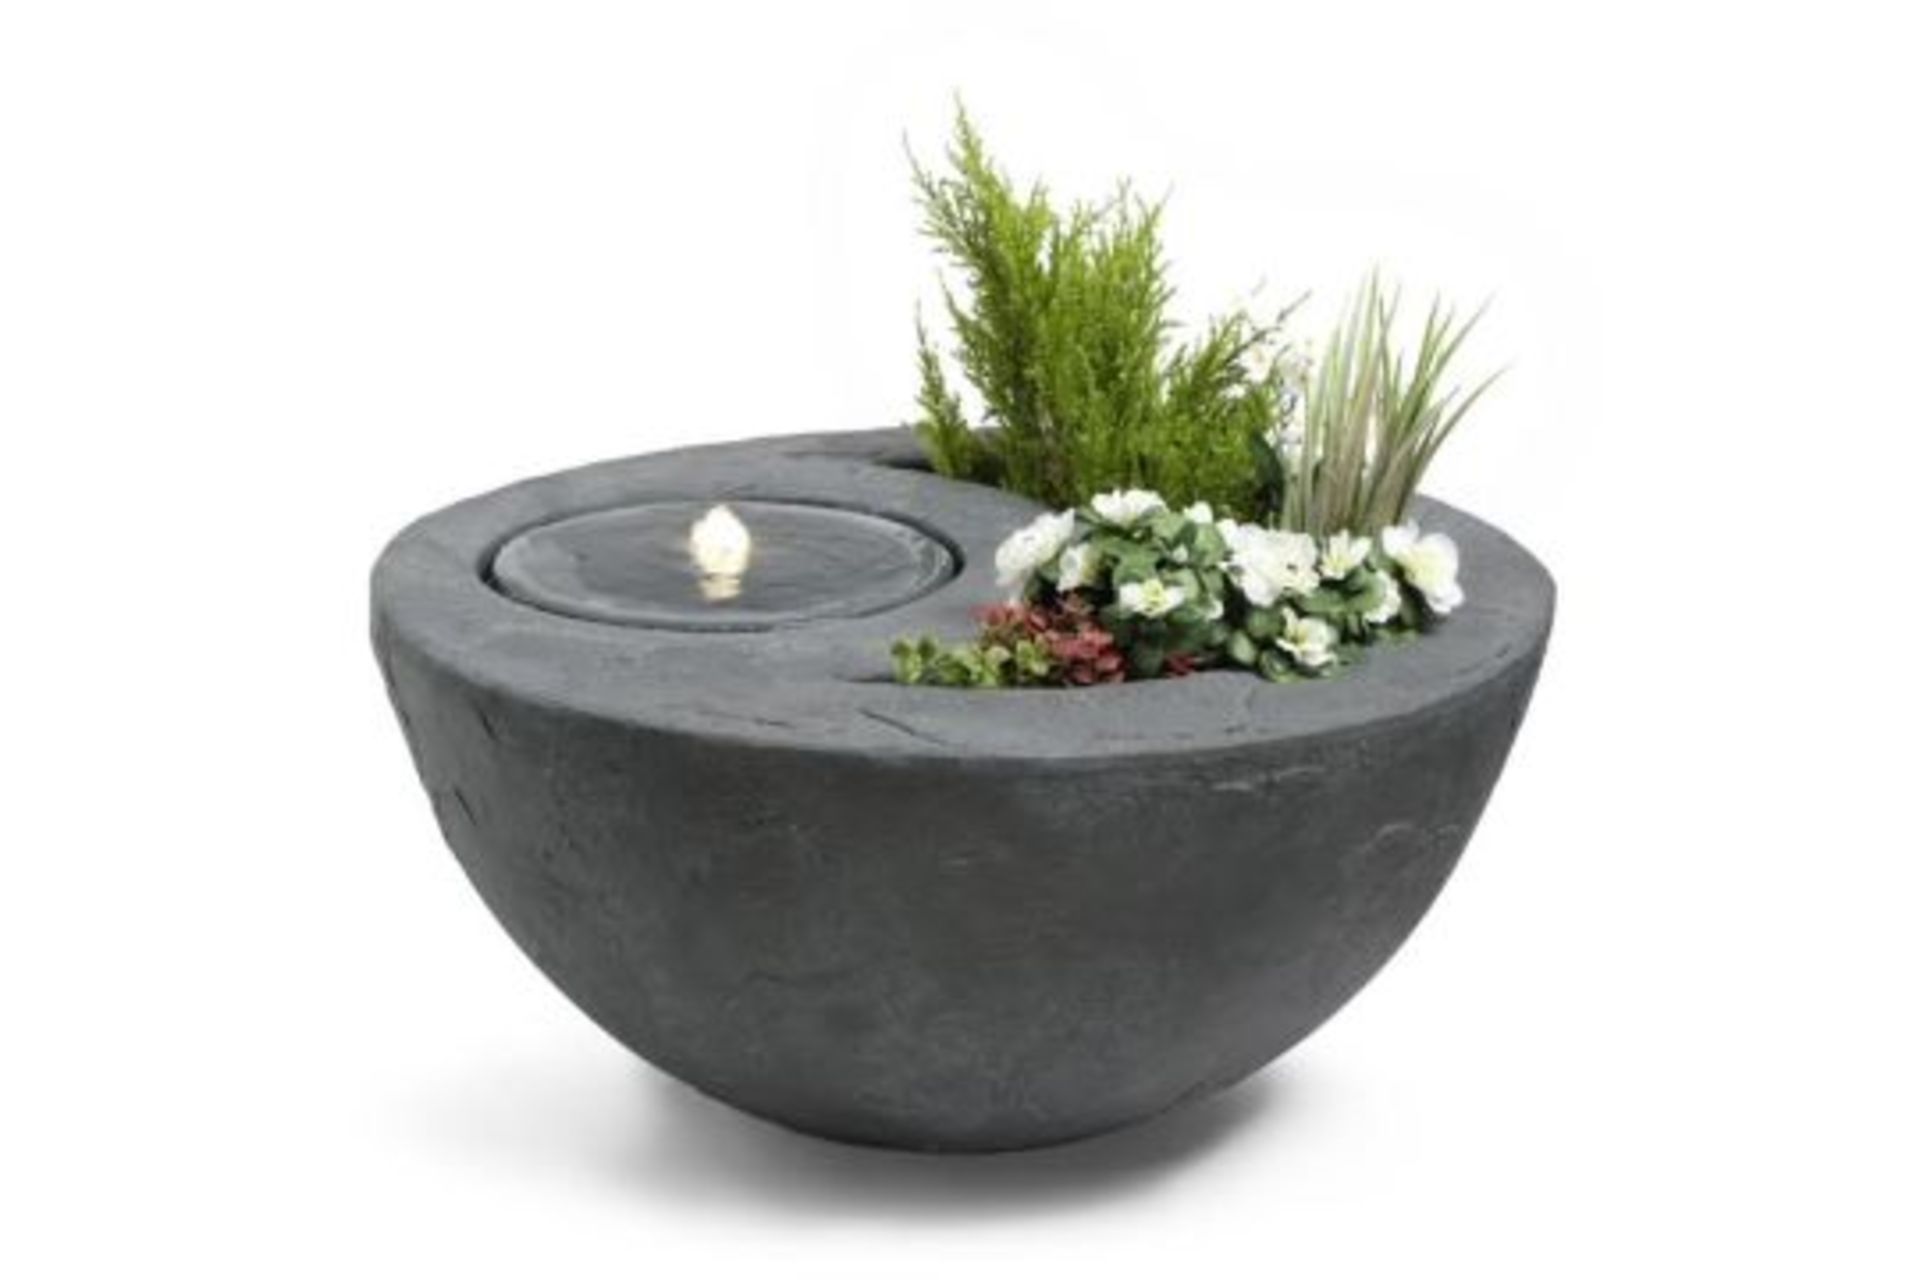 New & Boxed Dual Water Feature and Planter - Garden Bowl Design Planter, Indoor/Outdoor LED Lights